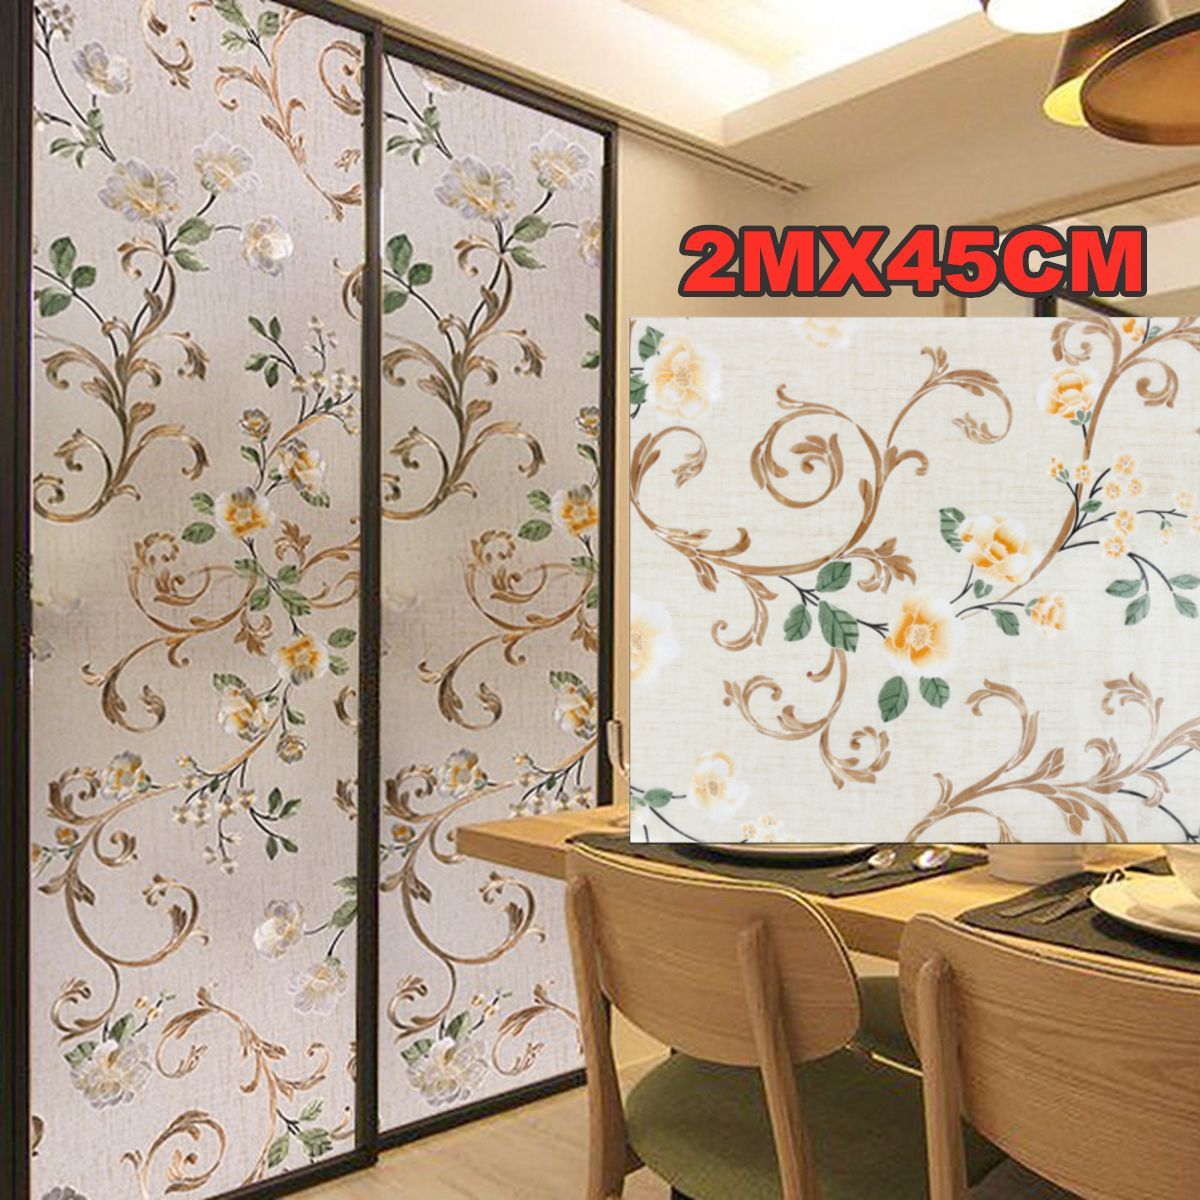 PVC-Frosted-Glass-Window-Privacy-Self-Adhesive-Film-Sticker-Bedroom-Bathroom-Decor-1468855